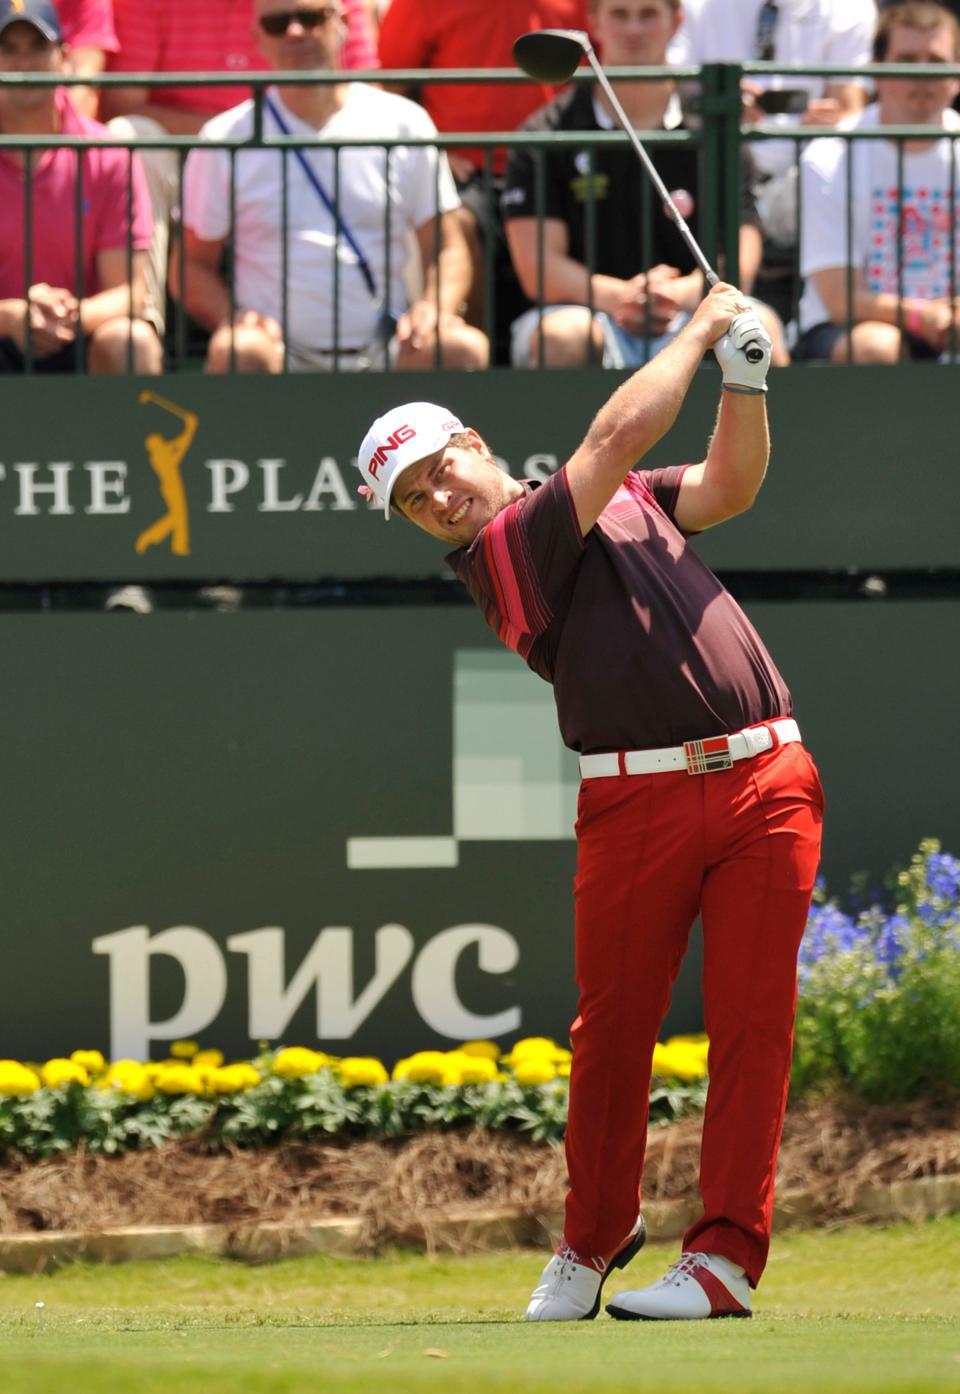 David Lingmerth went head-to-head against competitors such as Tiger Woods and Sergio Garcia in the 2013 Players Championship, finishing in a tie for second.